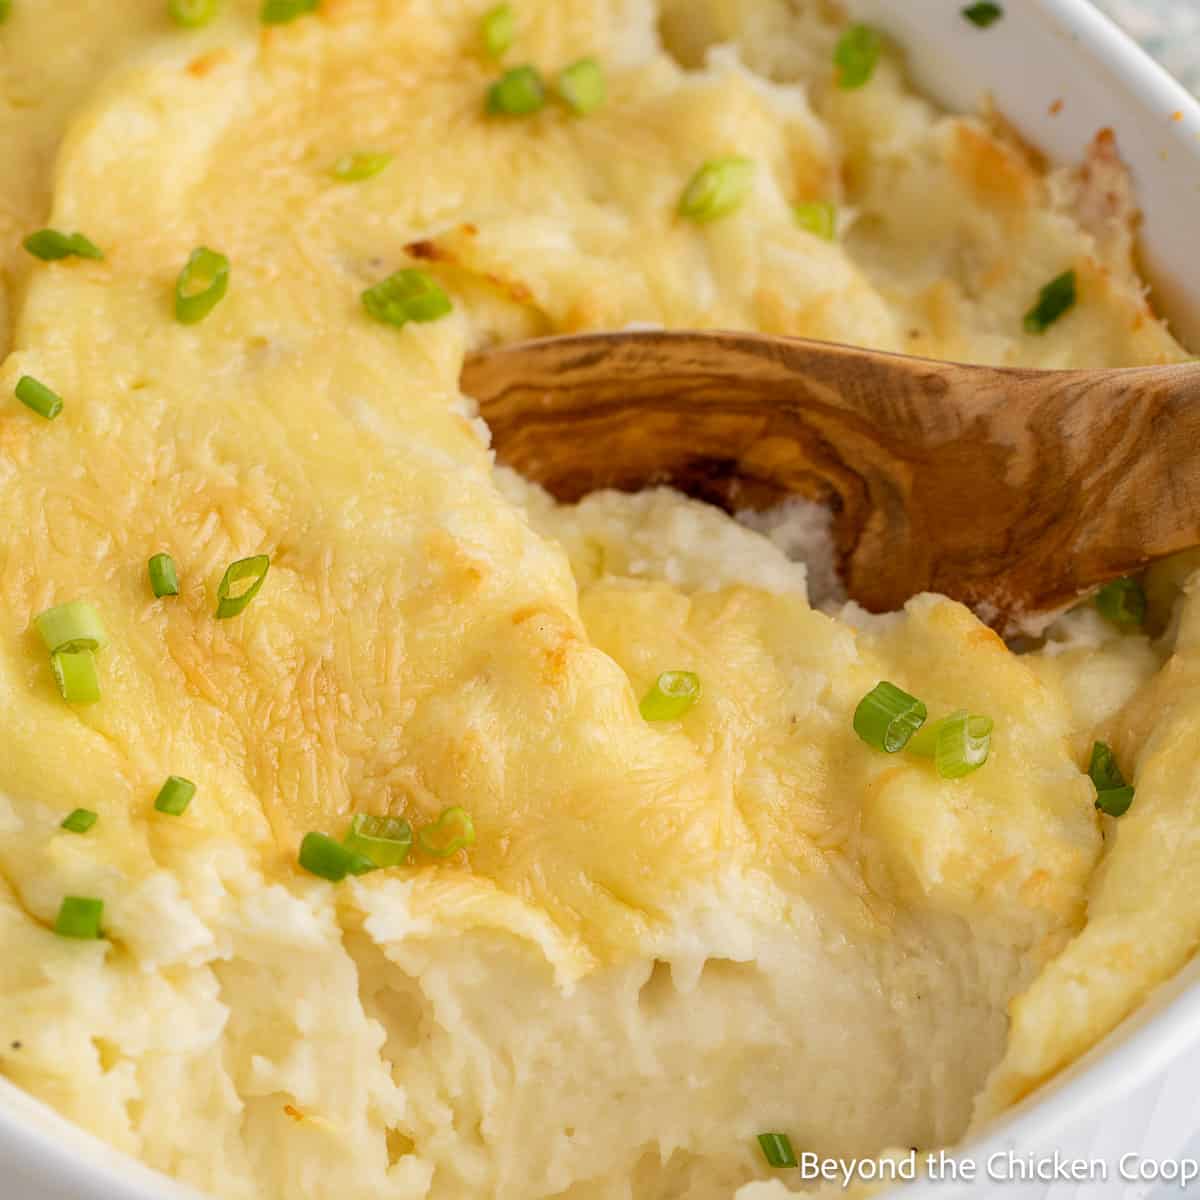 A wooden spoon scooping up mashed potatoes in a white casserole dish.